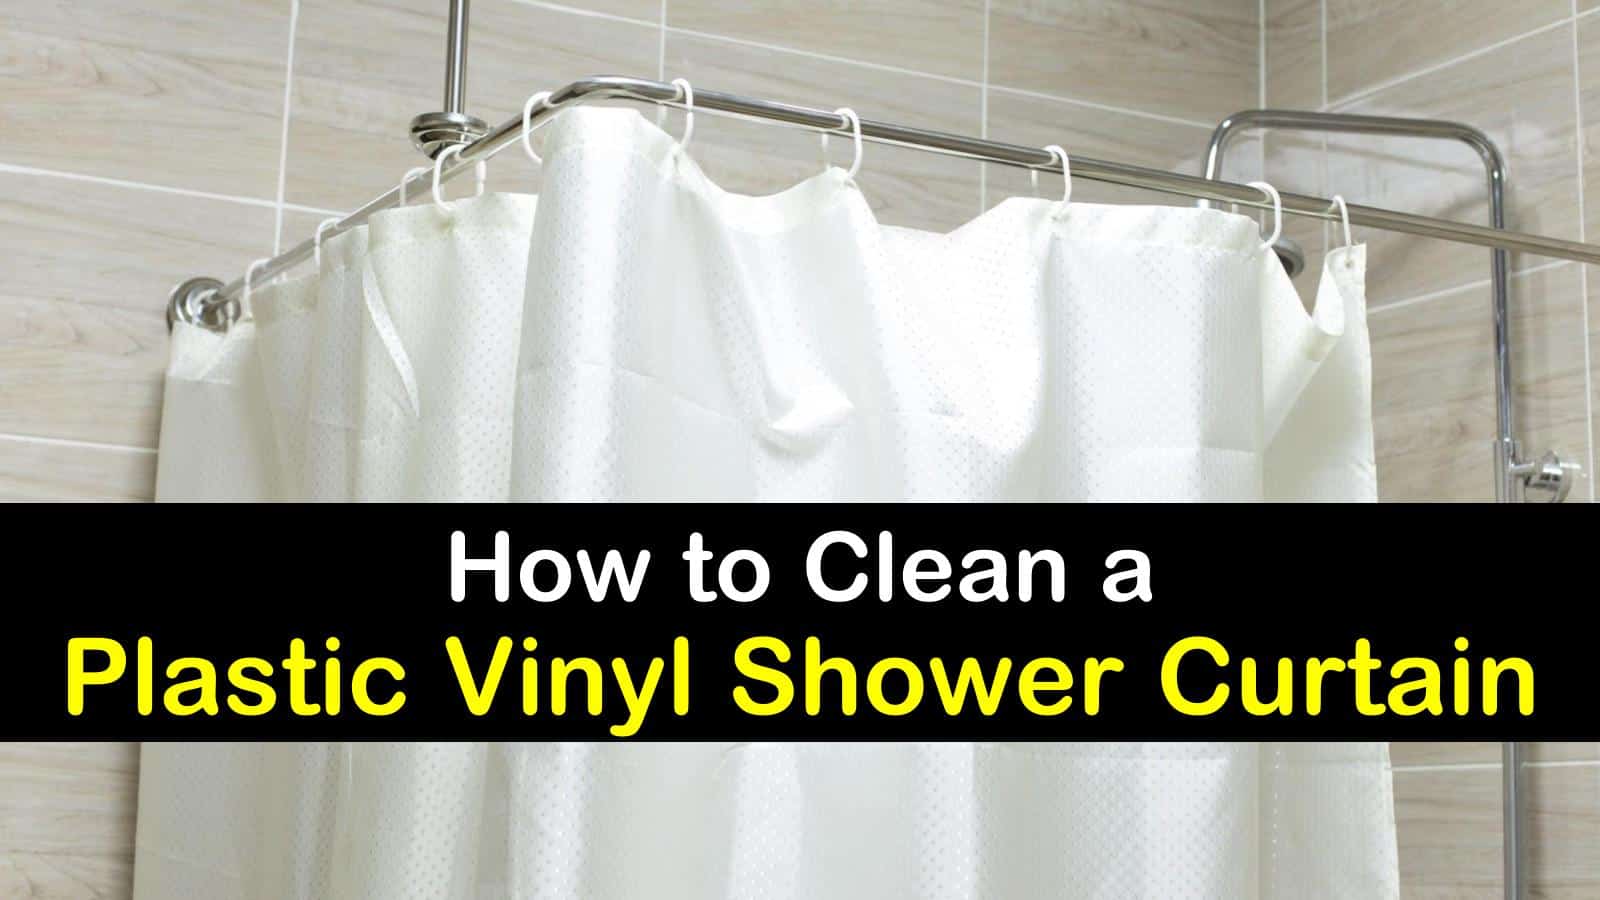 5 Excellent Ways To Clean A Shower Curtain, How To Avoid Moldy Shower Curtain